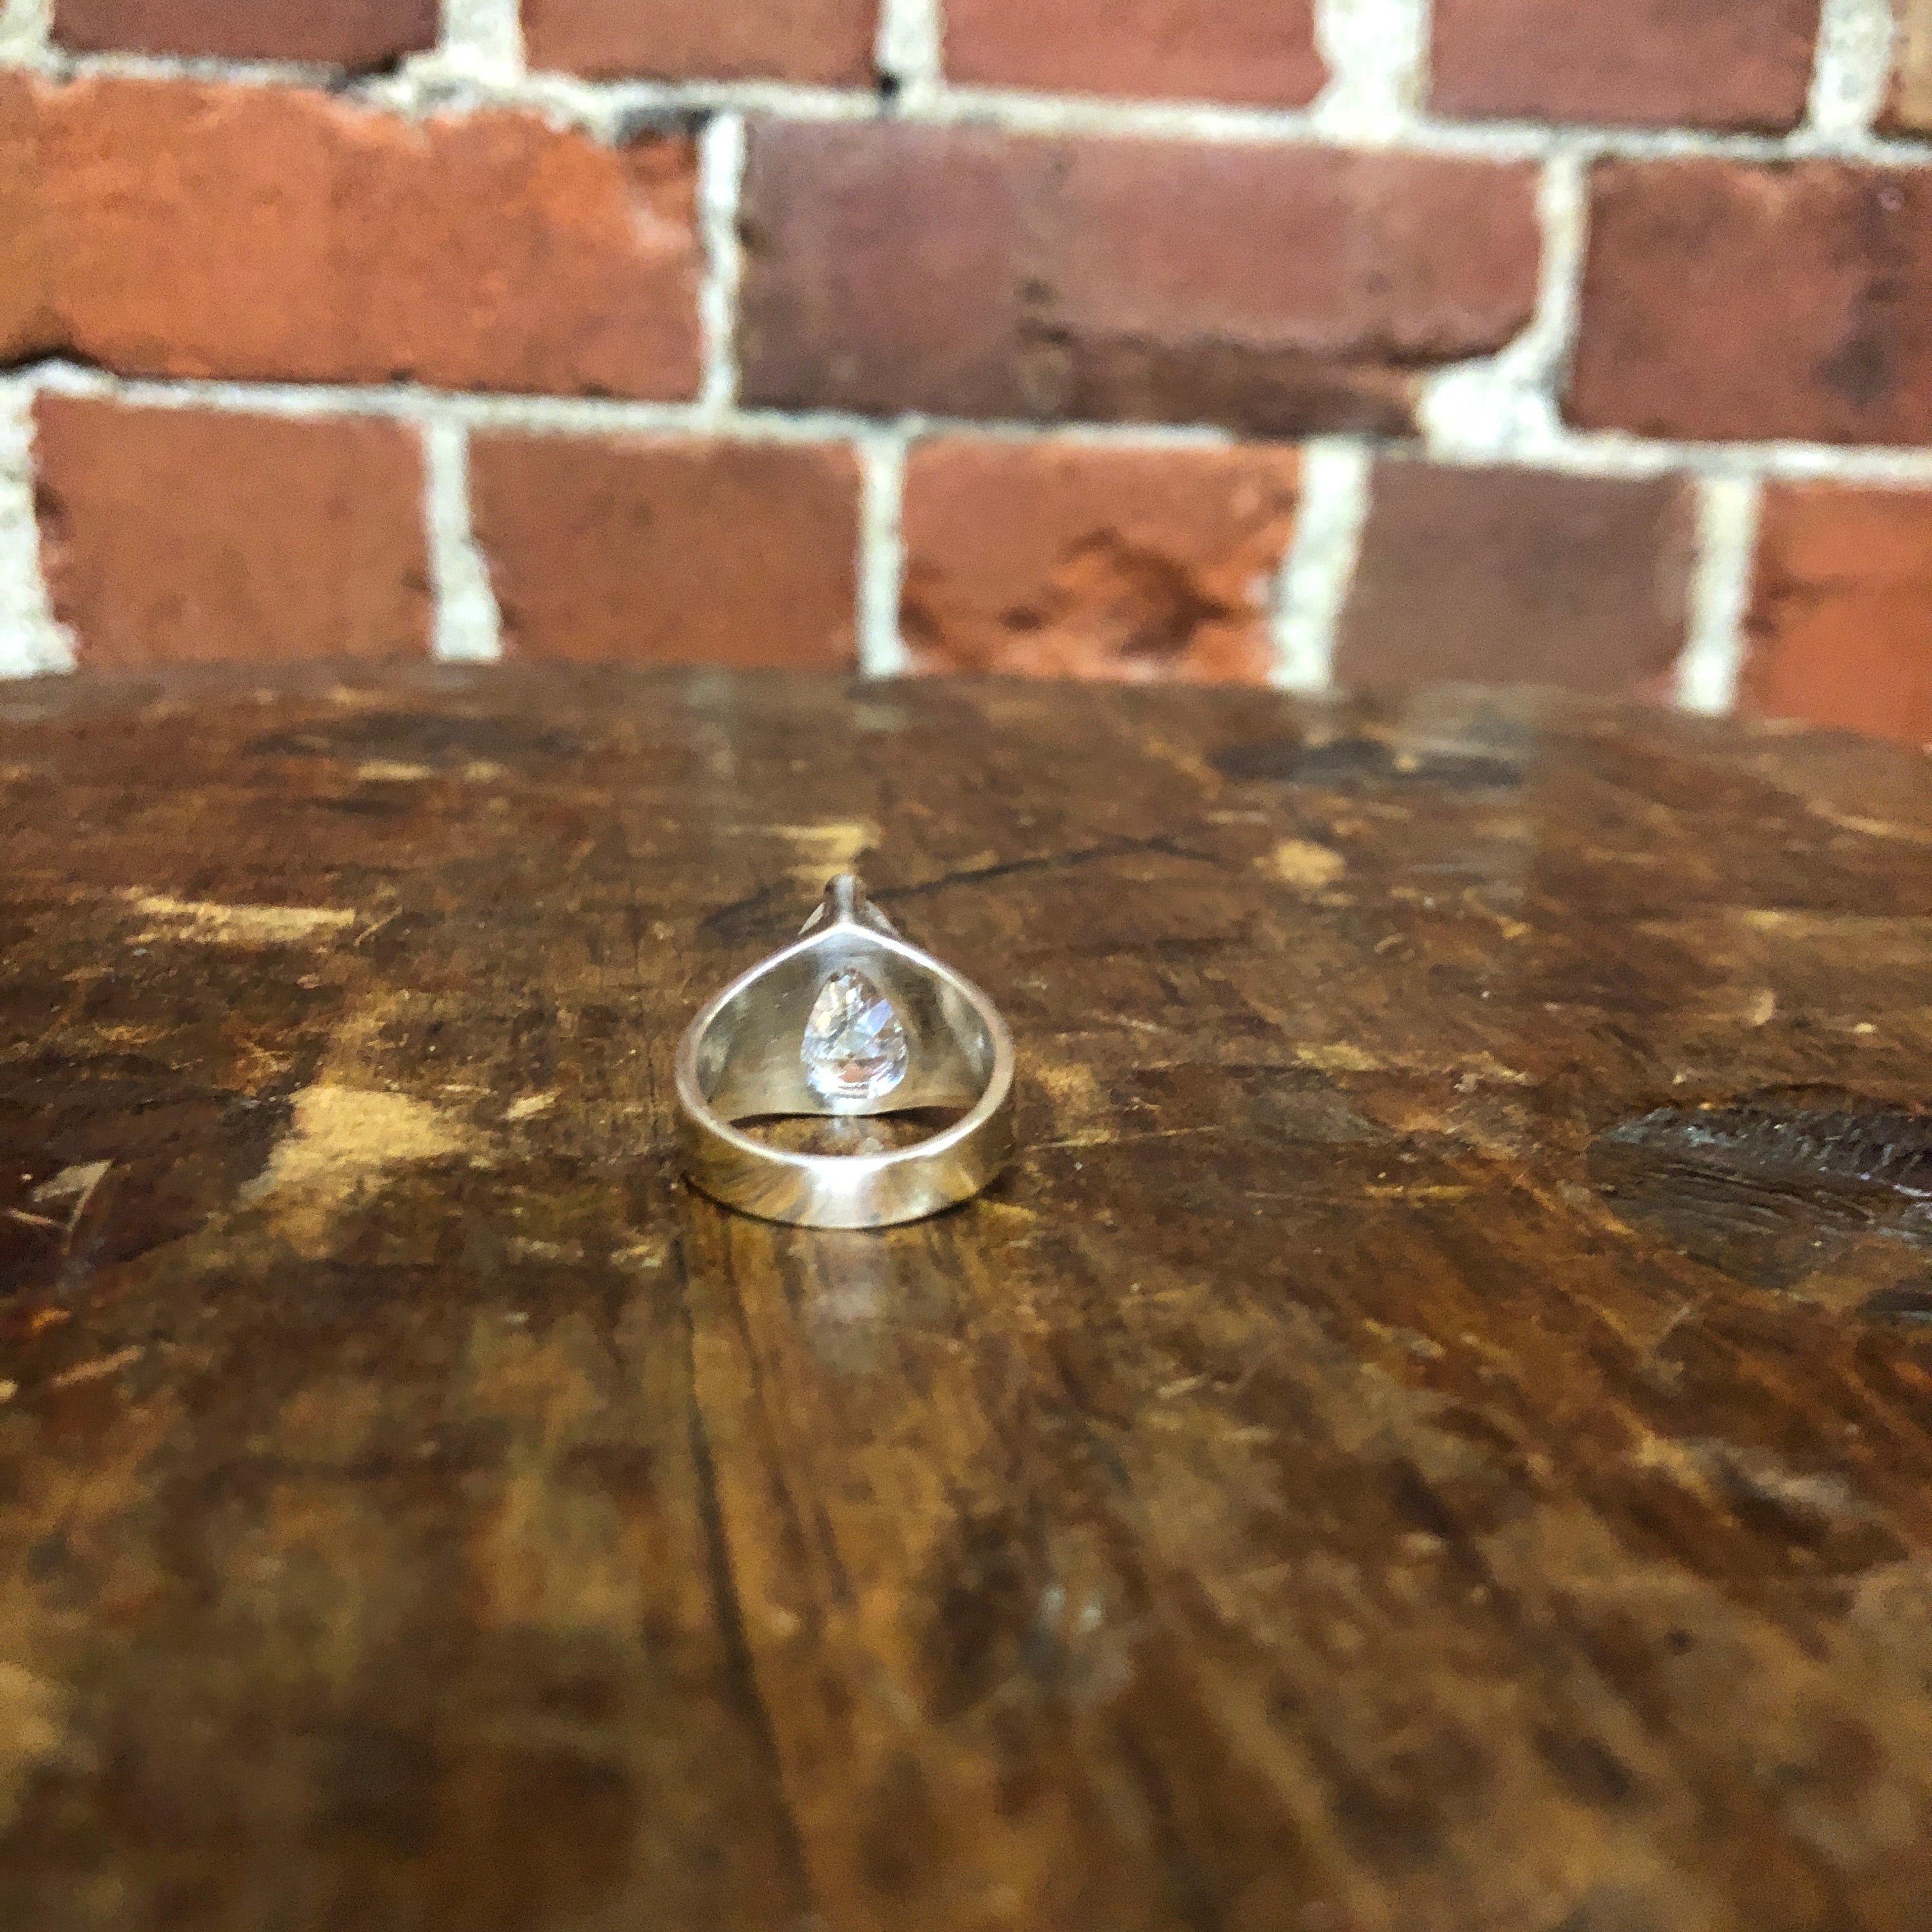 STG SILVER AND “diamond” ring